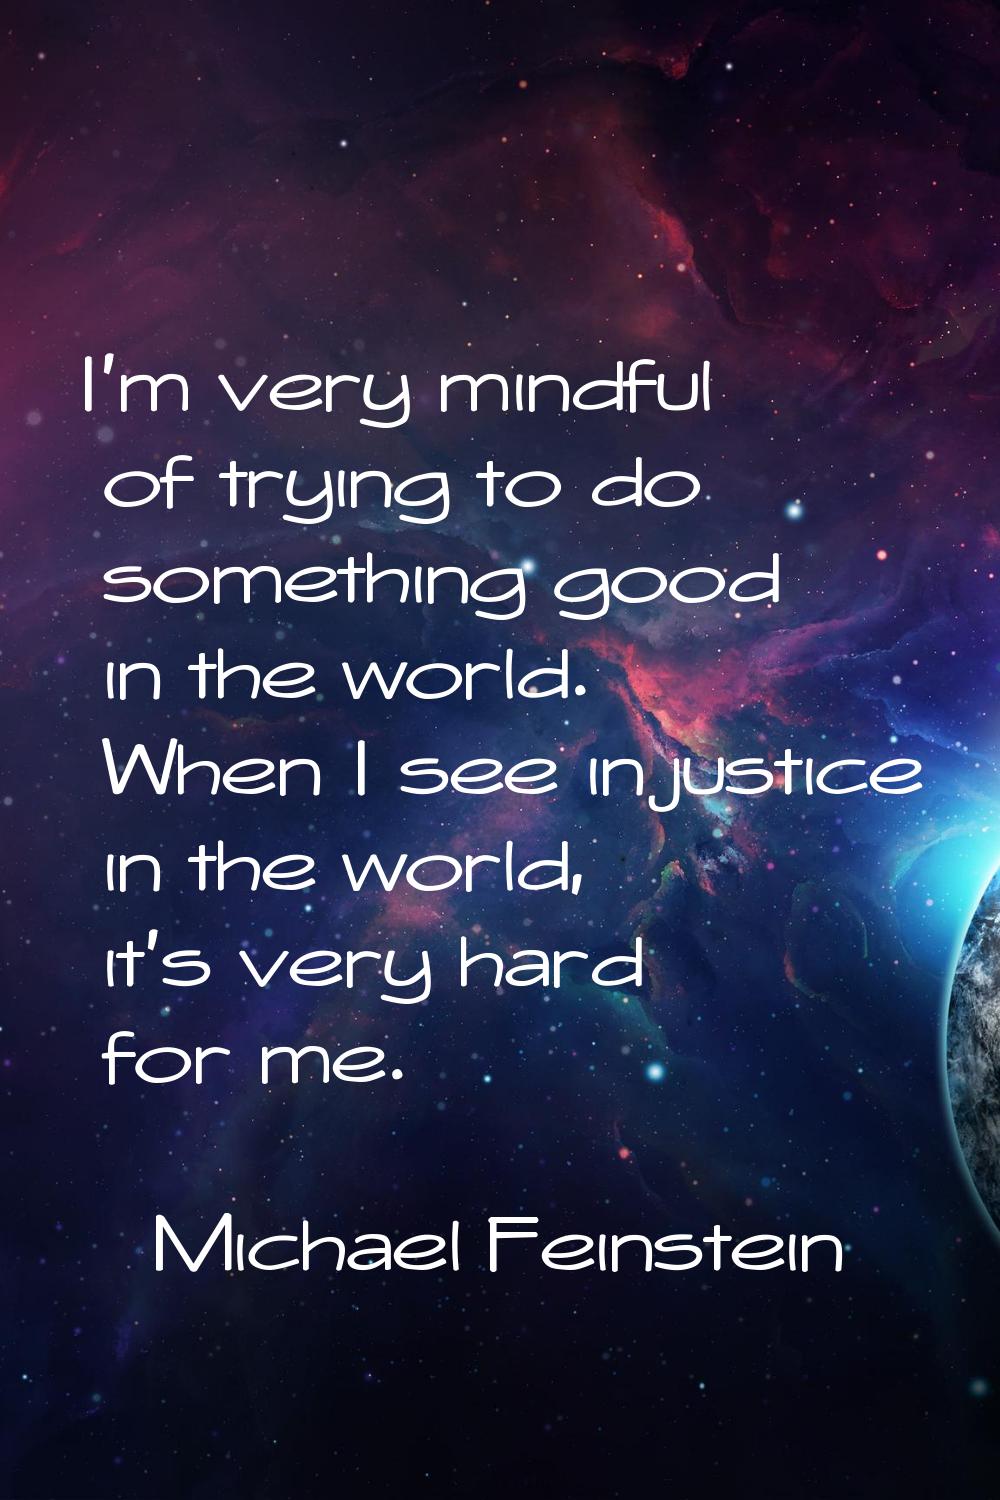 I'm very mindful of trying to do something good in the world. When I see injustice in the world, it